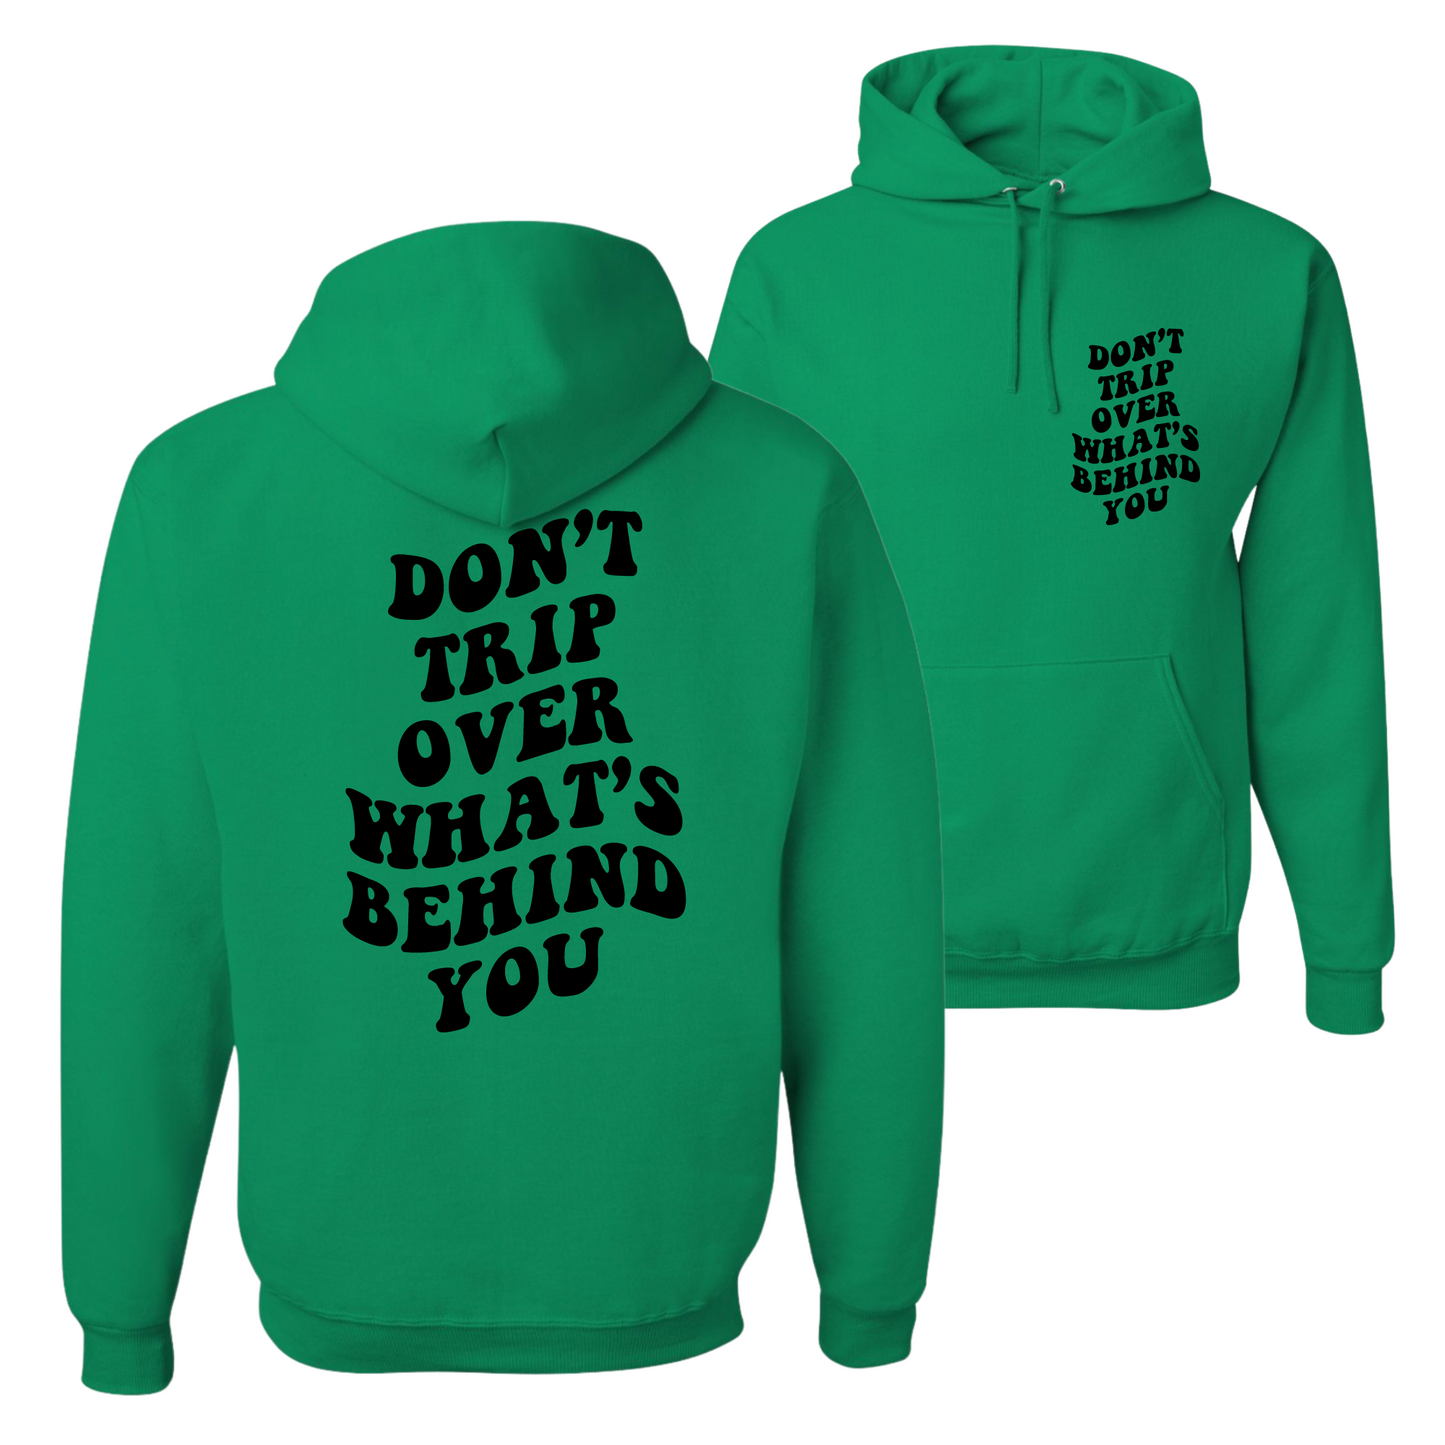 Resiliently Bold Don't Trip Over What's Behind You Kelly Green Hooded Sweatshirt